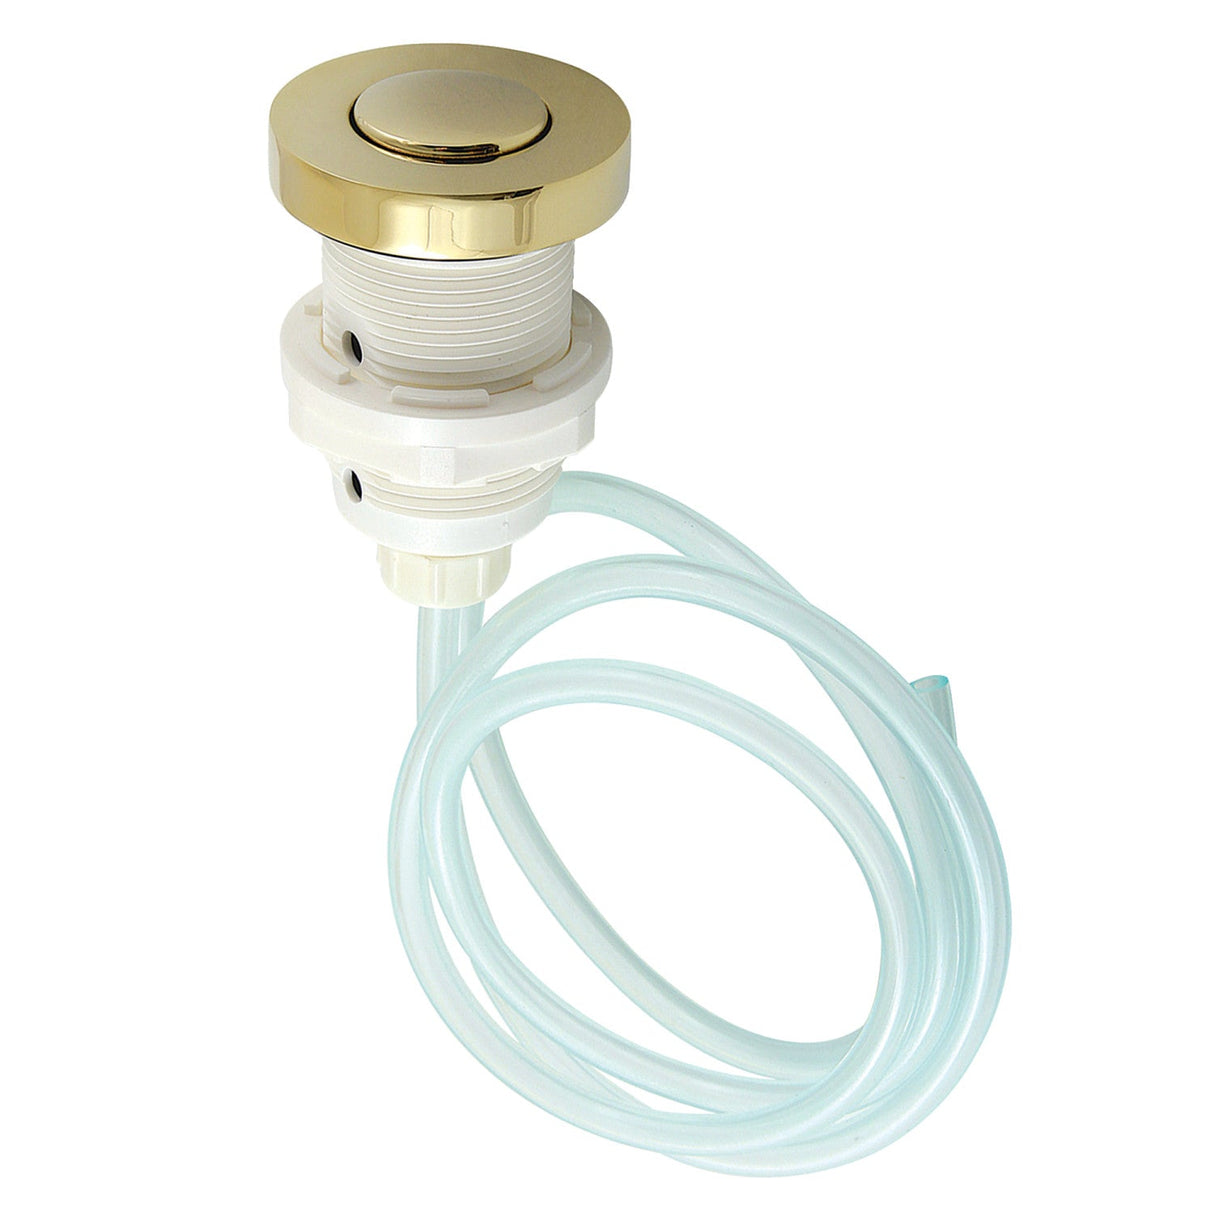 Trimscape KAM312 Garbage Disposal Air Switch Button, Polished Brass